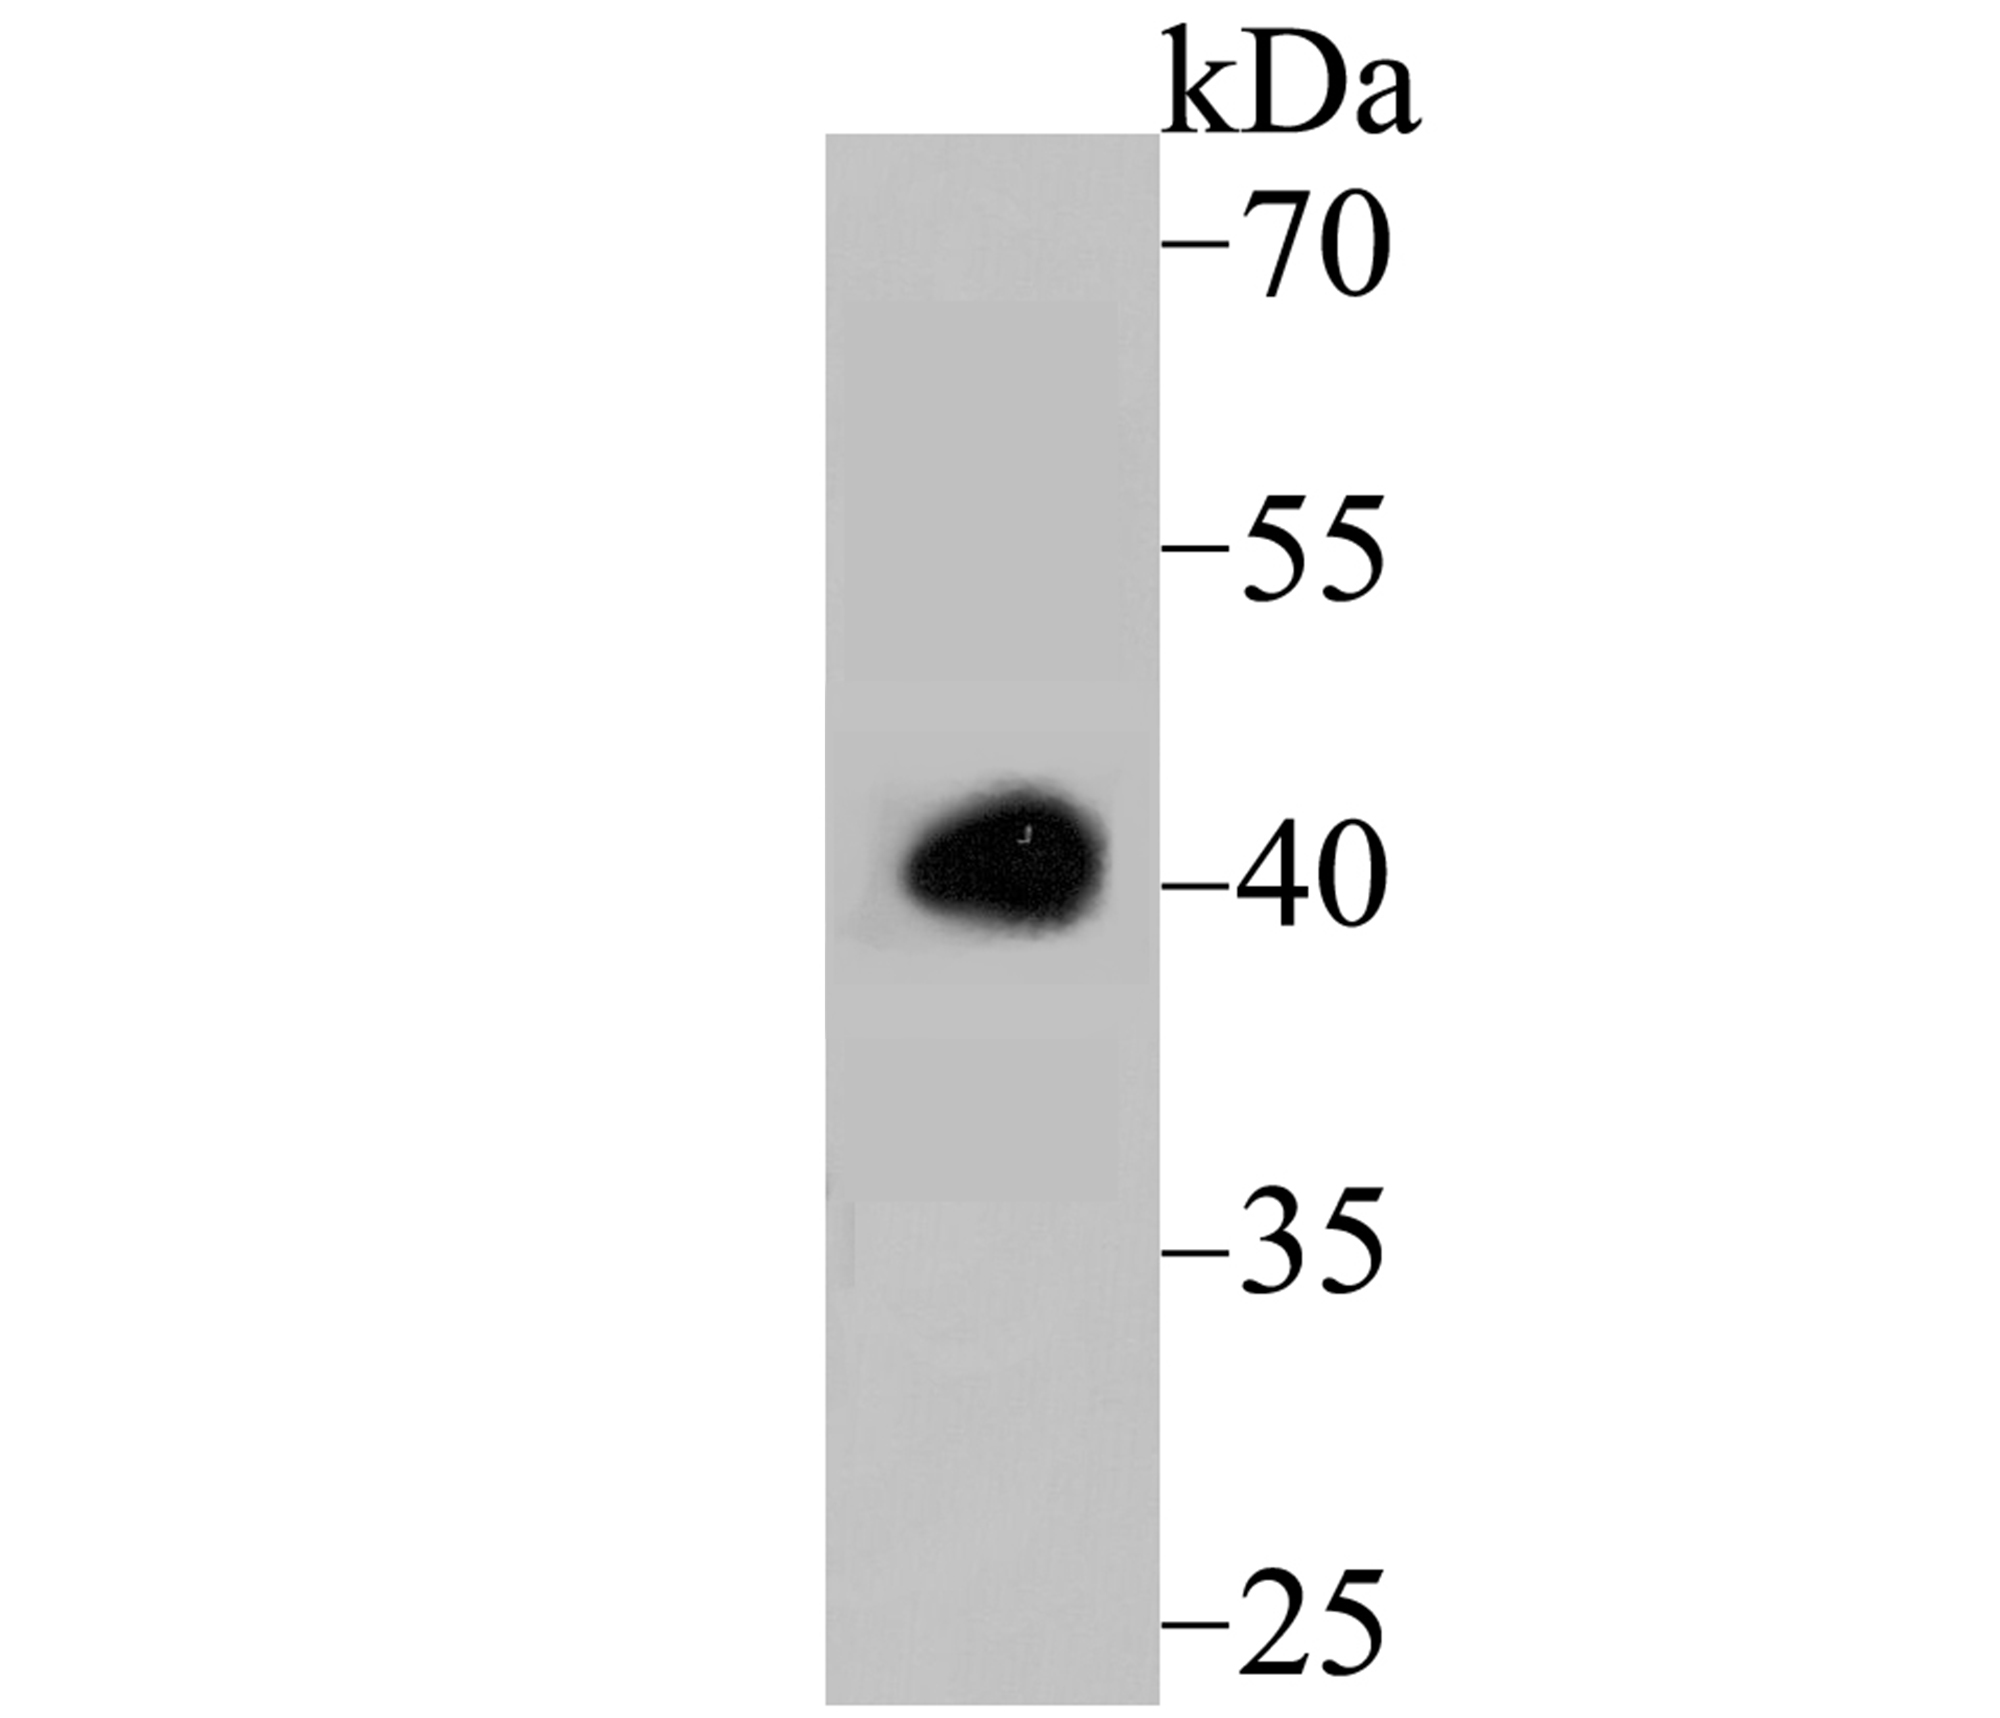 Western blot analysis of Apg3 on HL-60 cell lysate using anti-Apg3 antibody at 1/500 dilution.